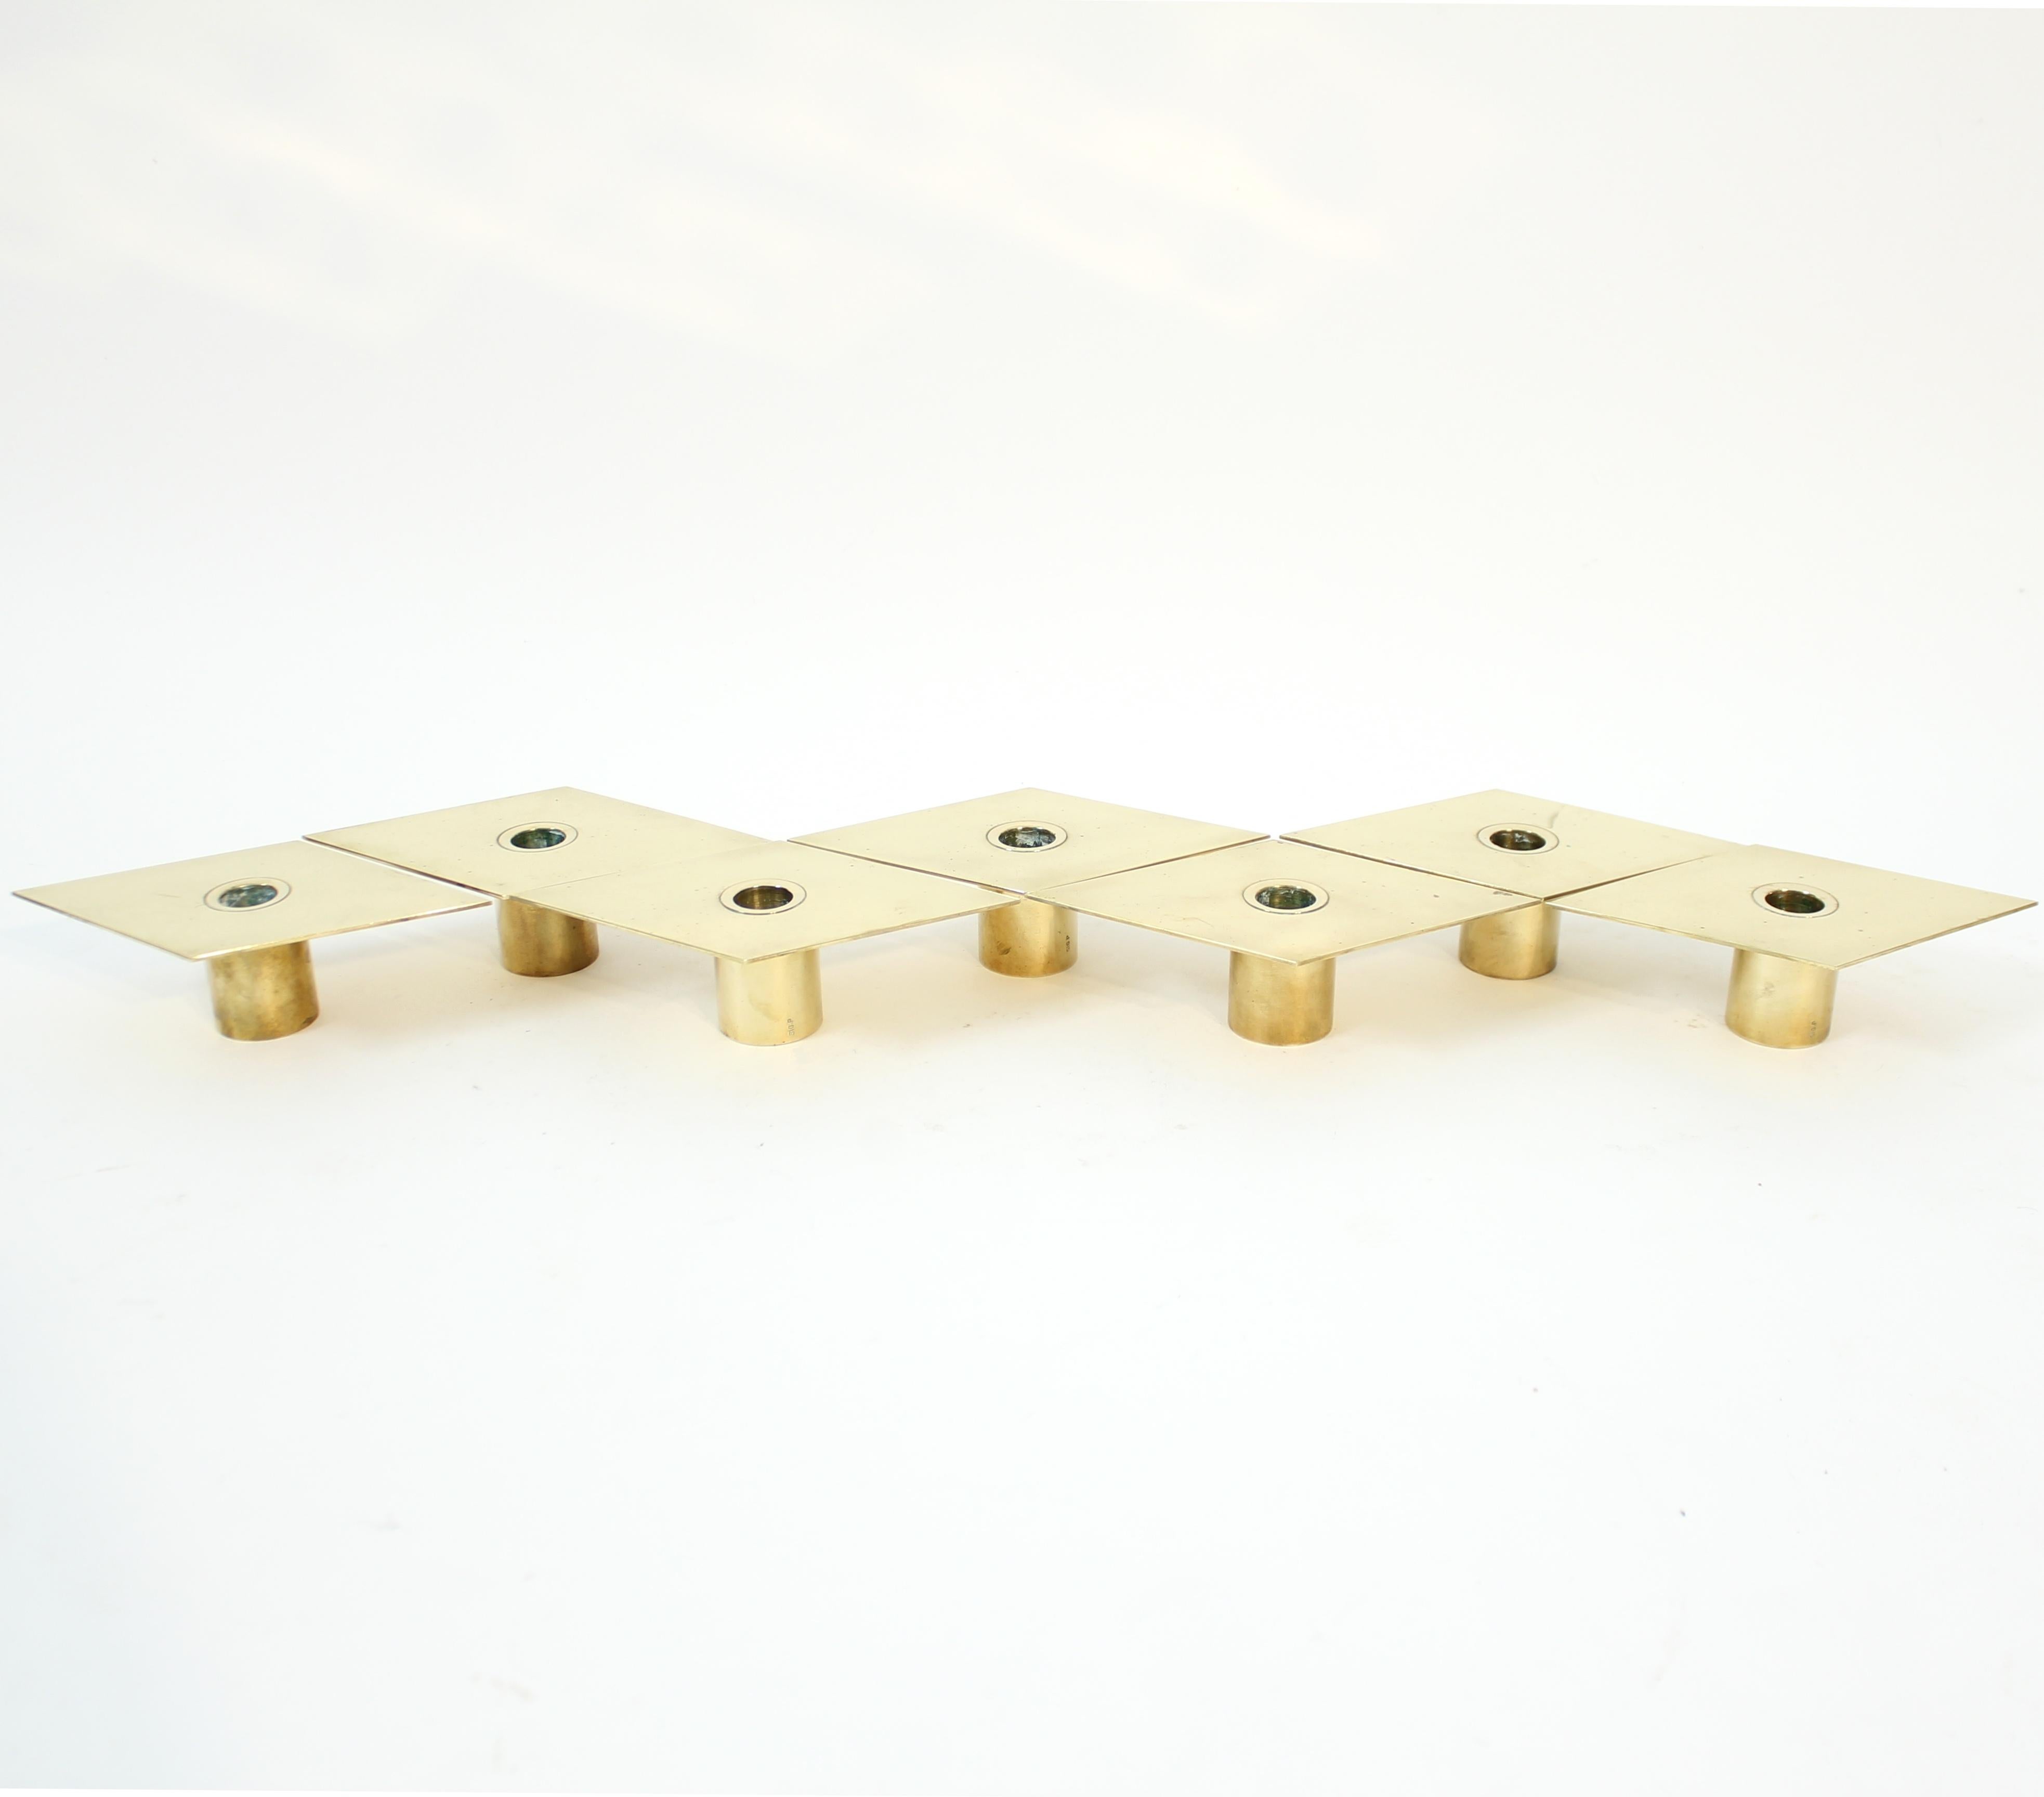 Scandinavian Modern Sigurd Persson, set of 7 brass Romb candle holders, 1980s For Sale